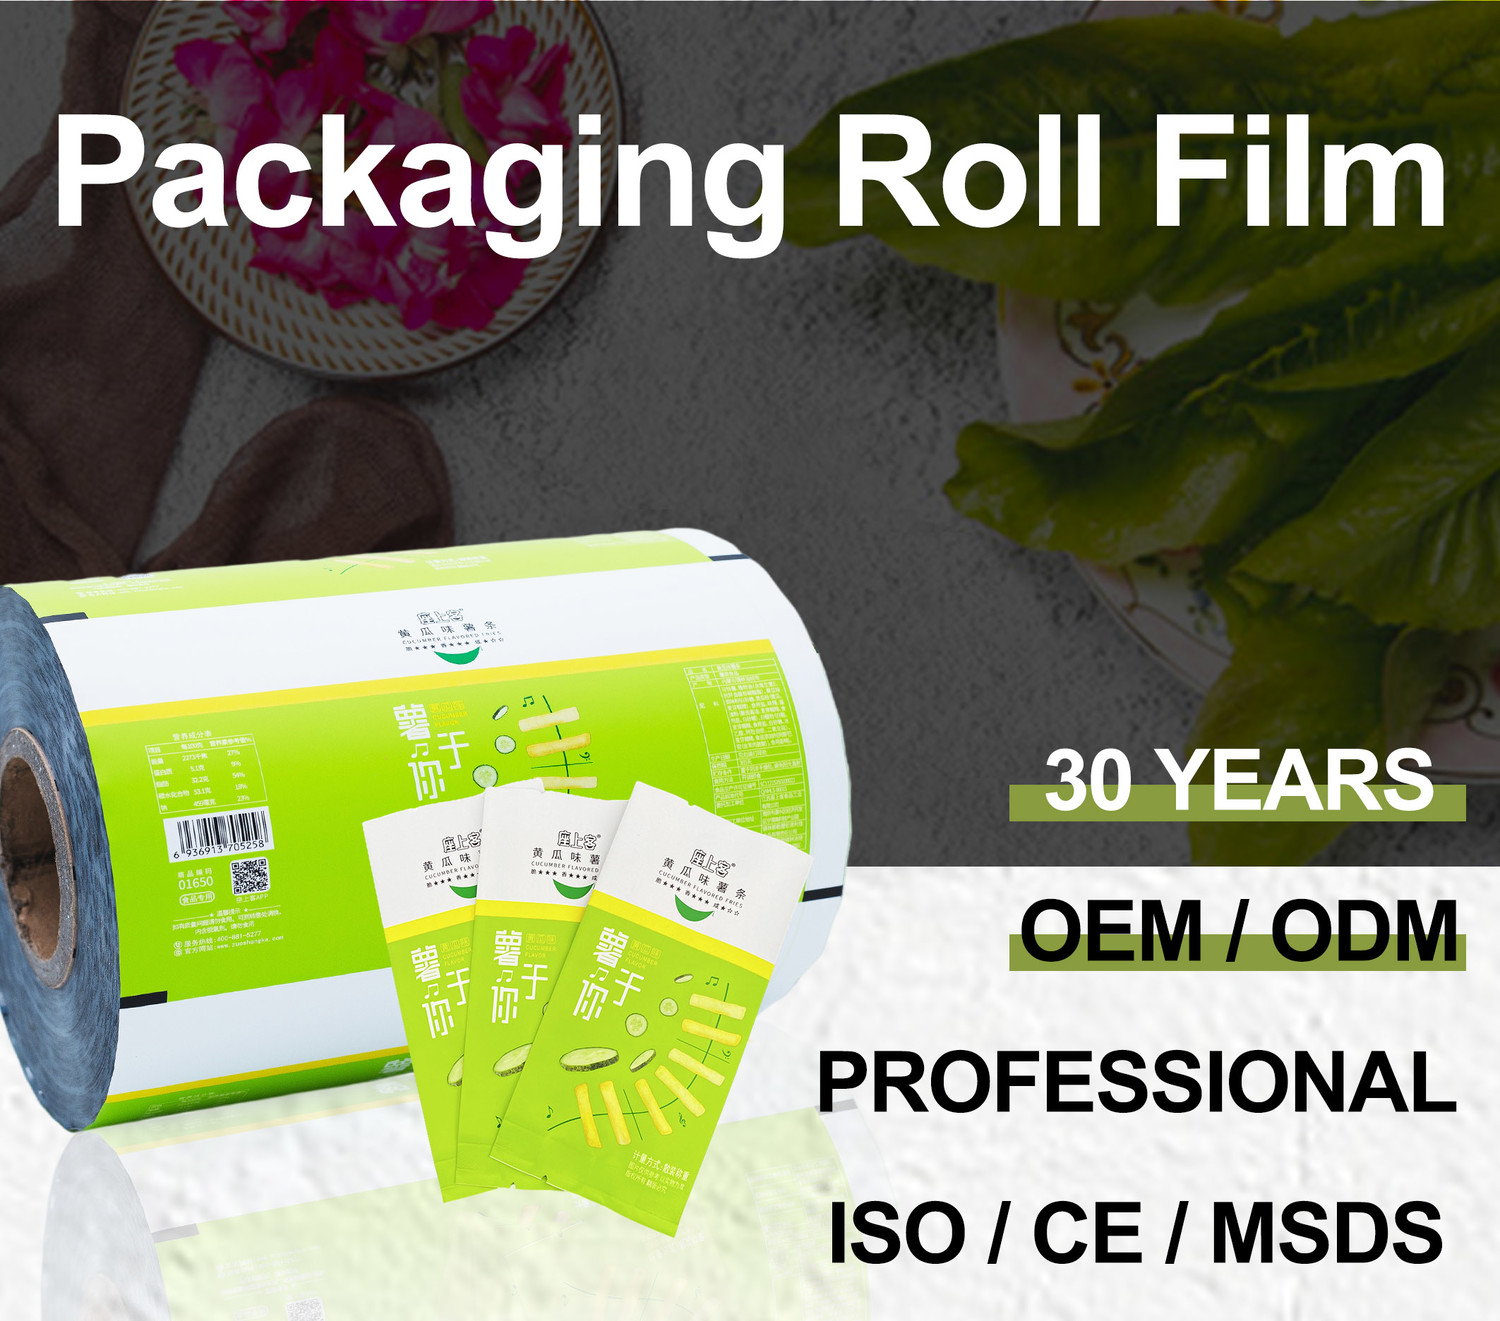 Packaging Roll Film candy wrapper